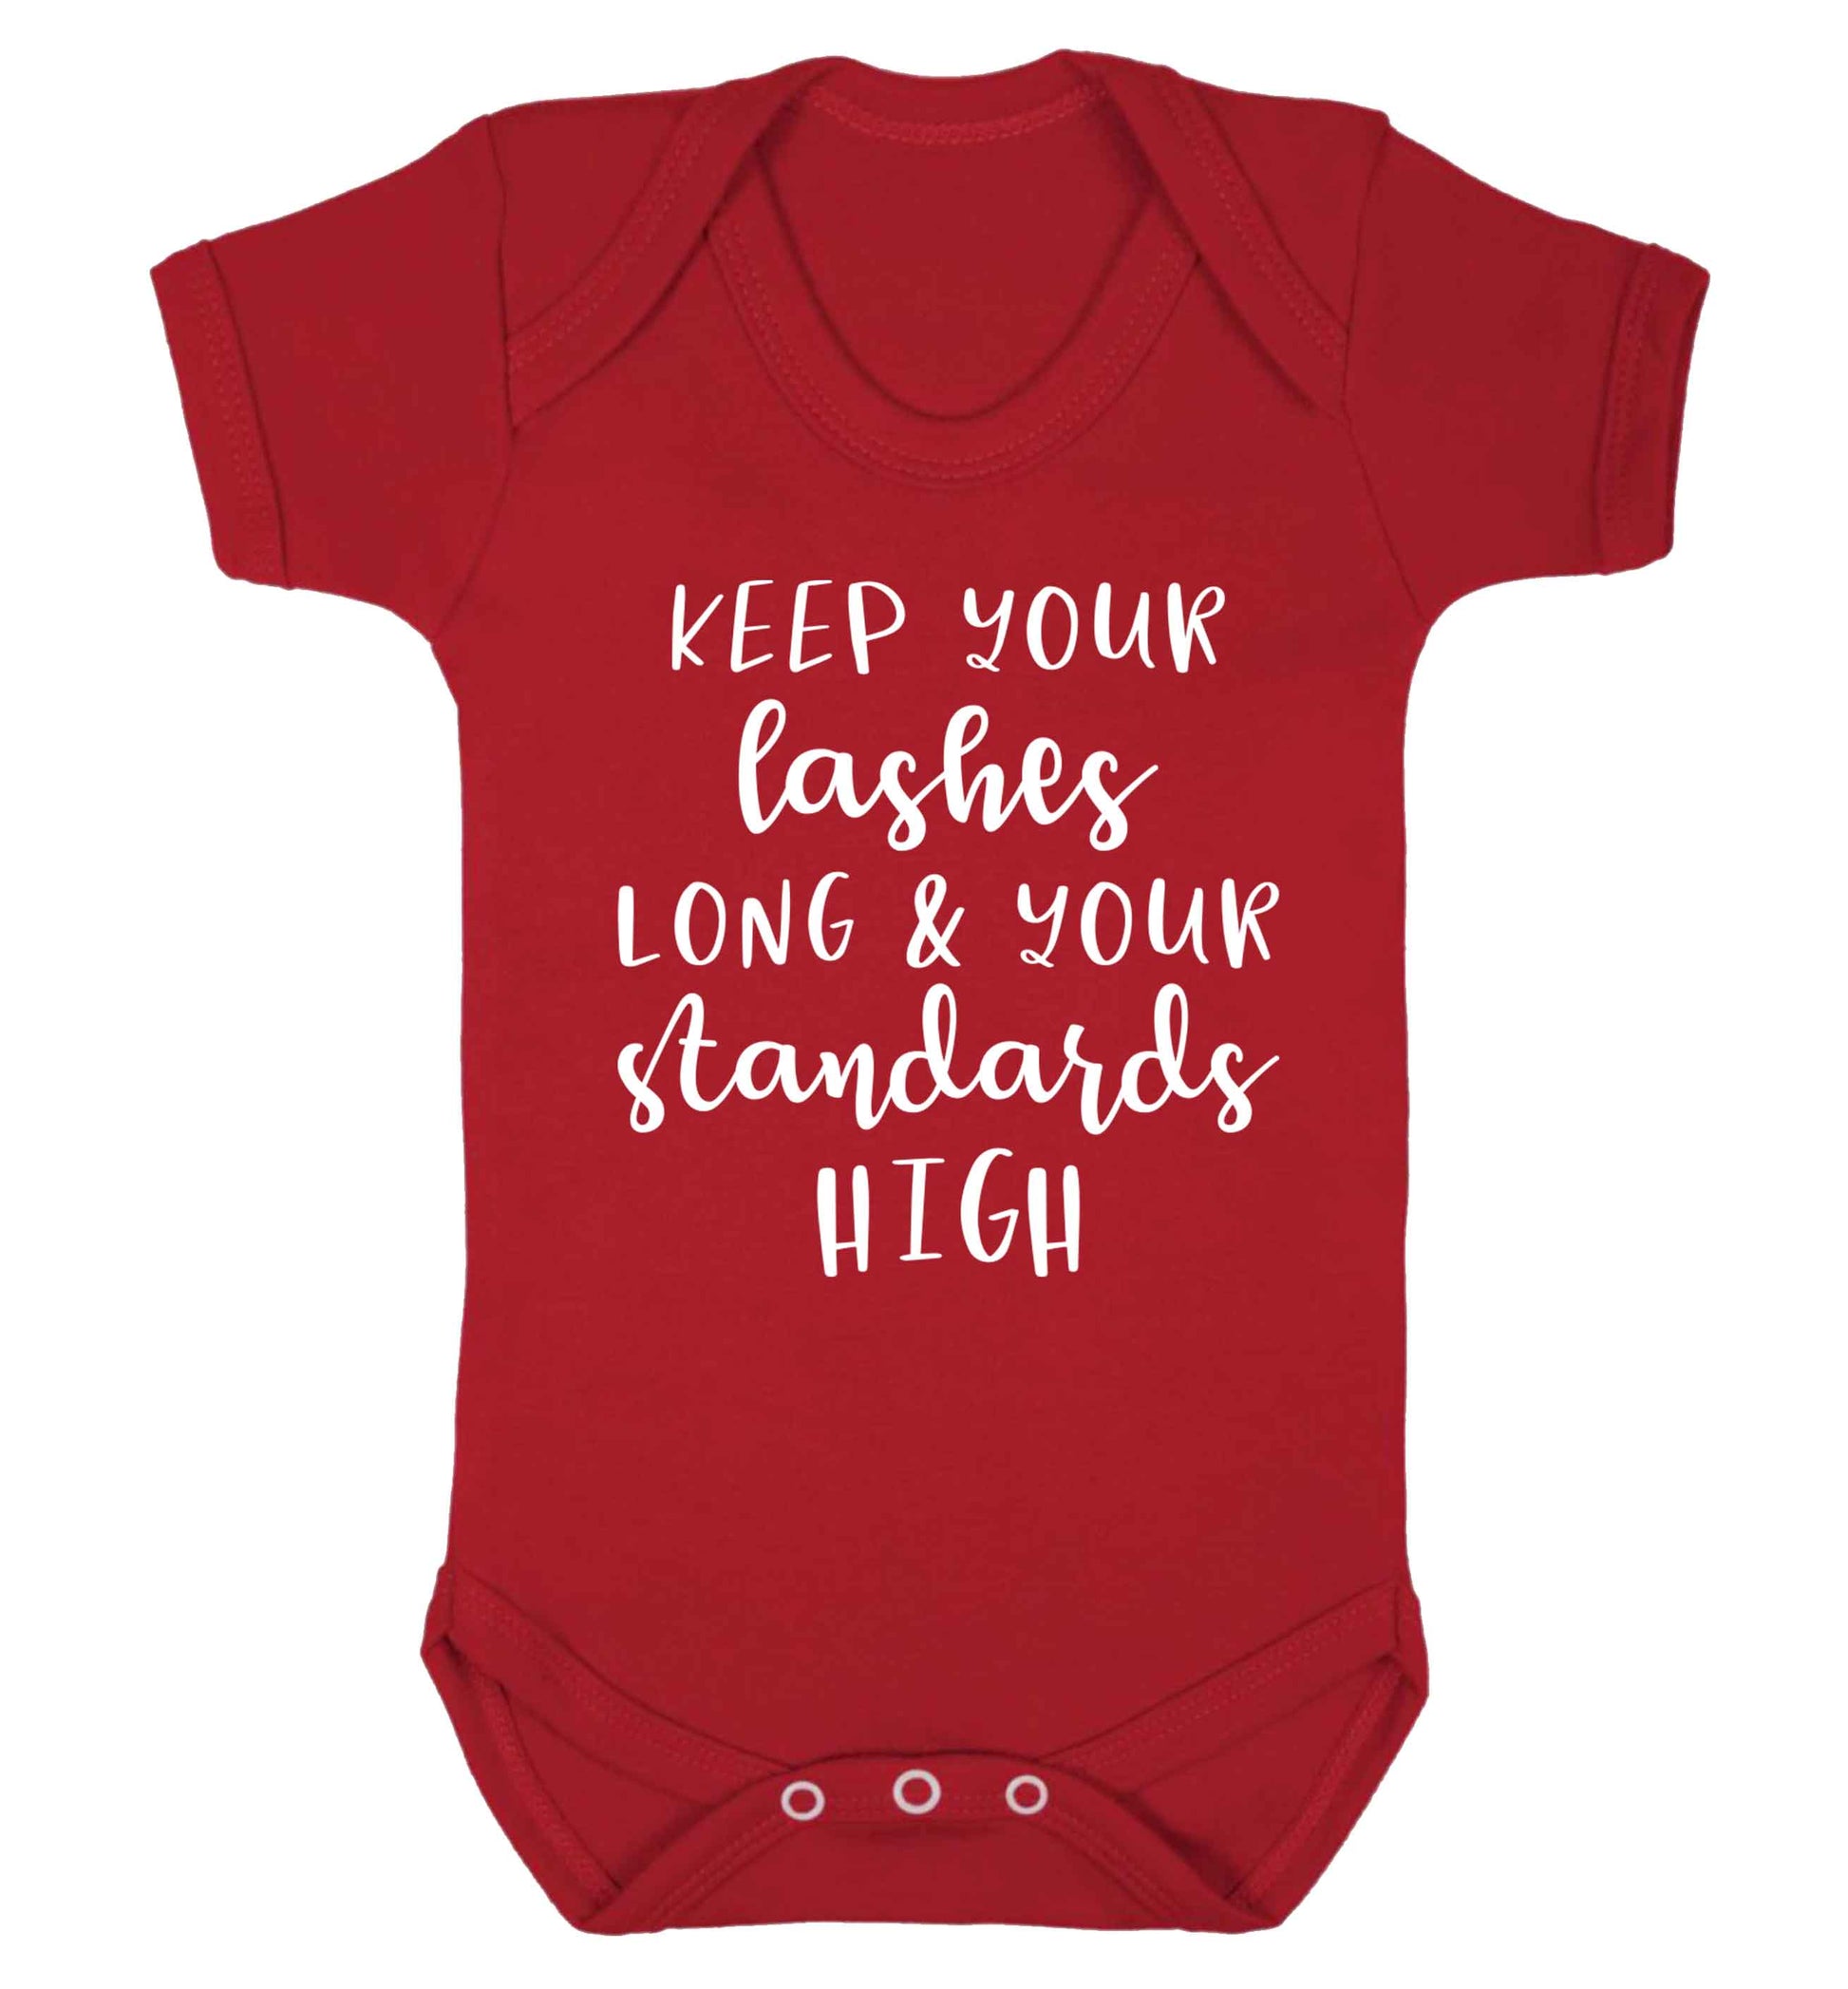 Keep your lashes long and your standards high Baby Vest red 18-24 months